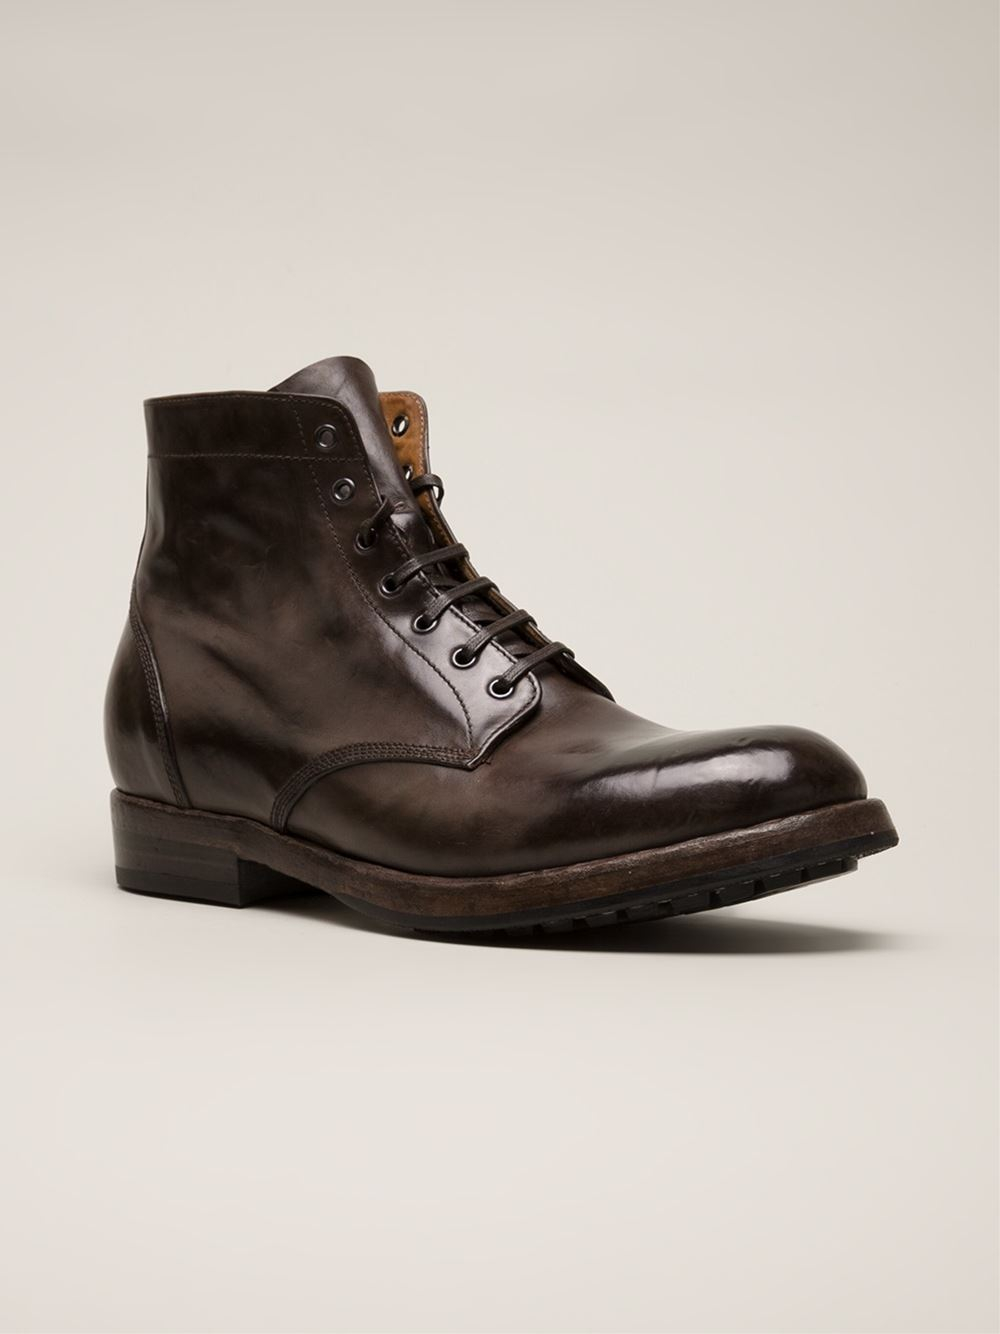 Lyst - Officine creative Lowry Boots in Brown for Men